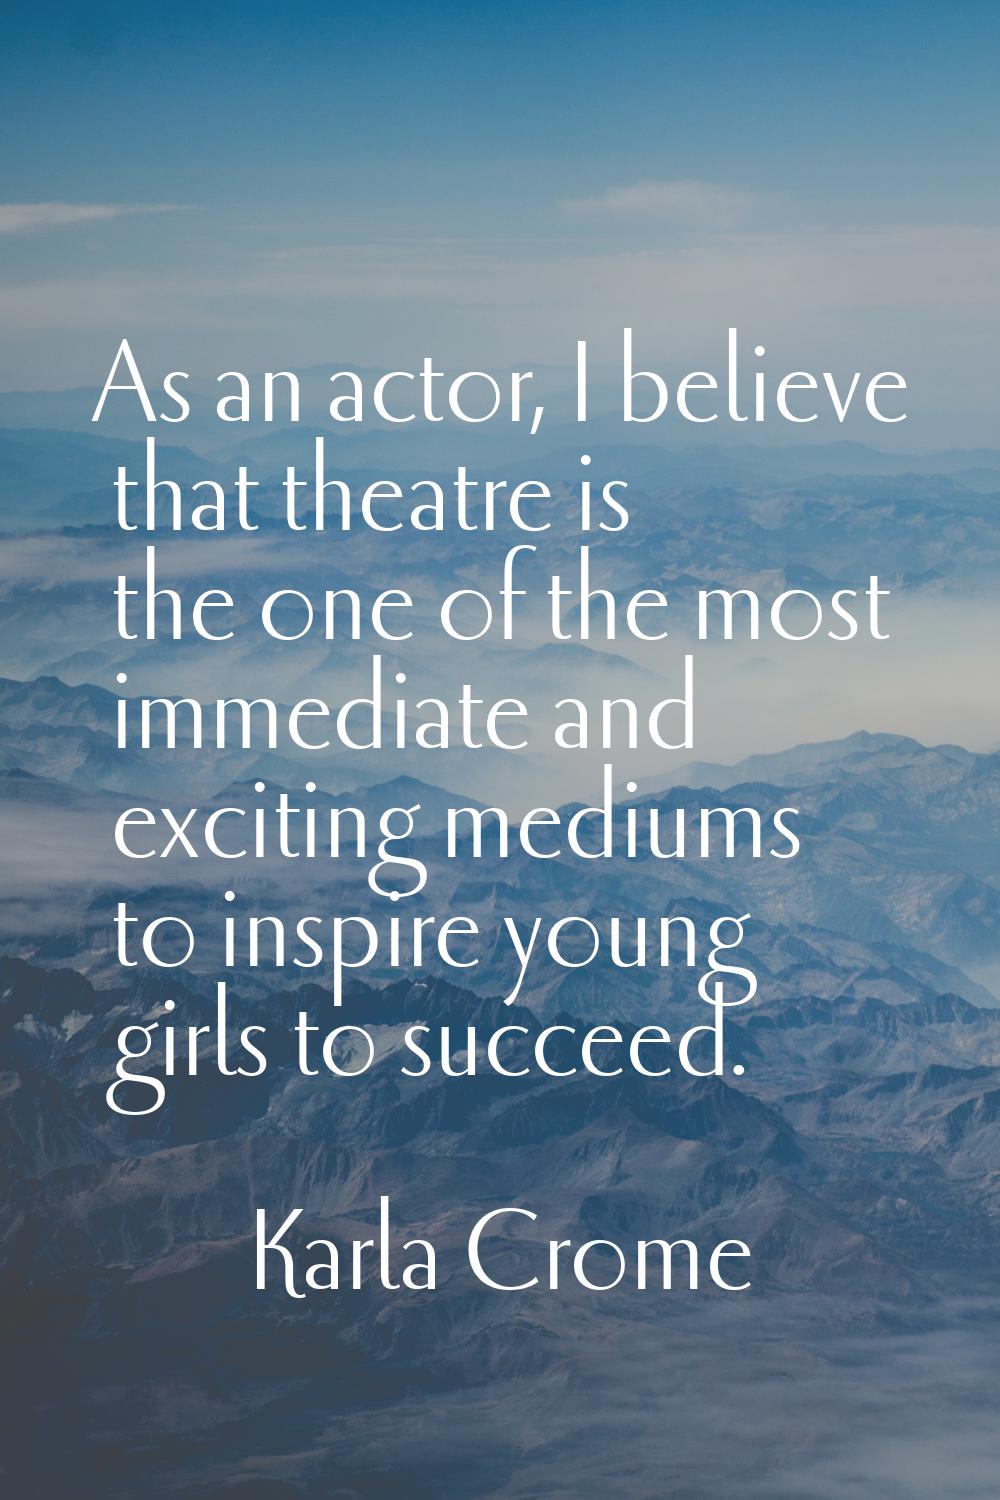 As an actor, I believe that theatre is the one of the most immediate and exciting mediums to inspir